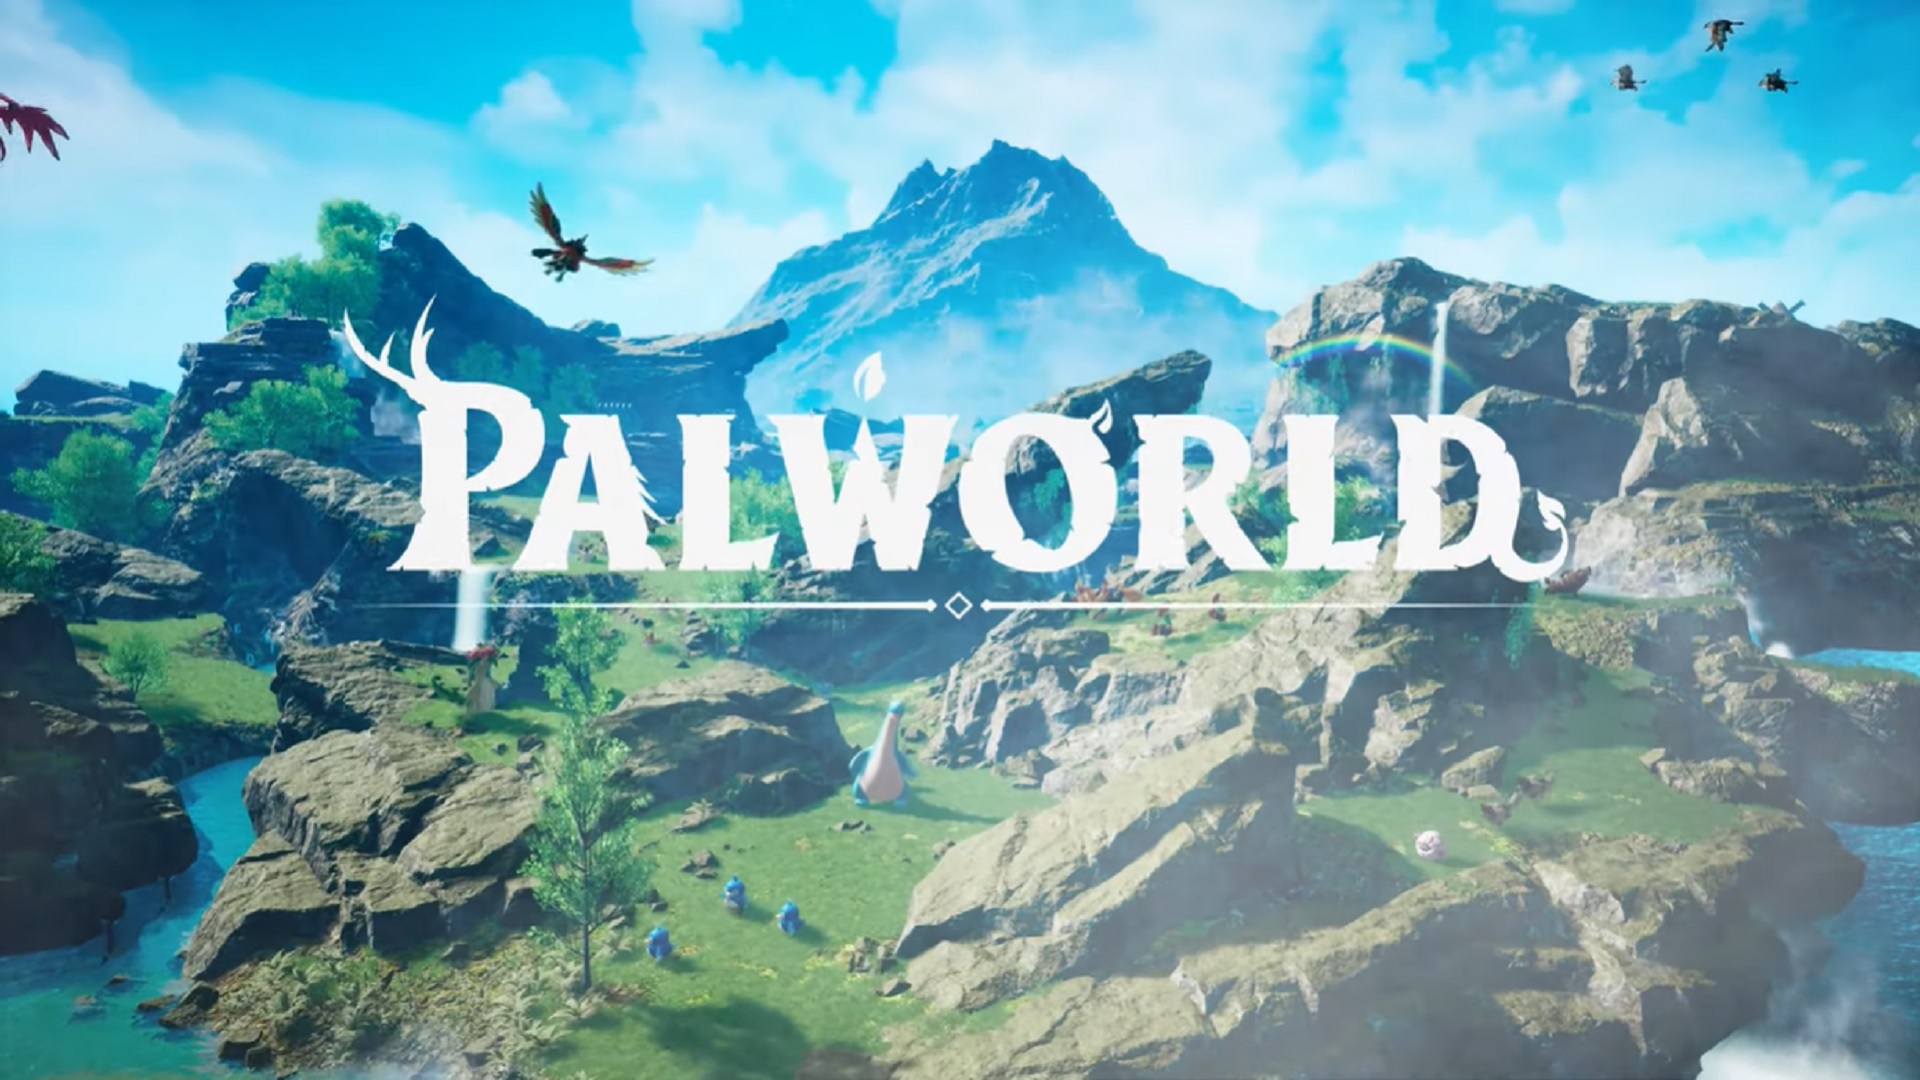 Palworld will be a new Pokemon-style game, features a new trailer